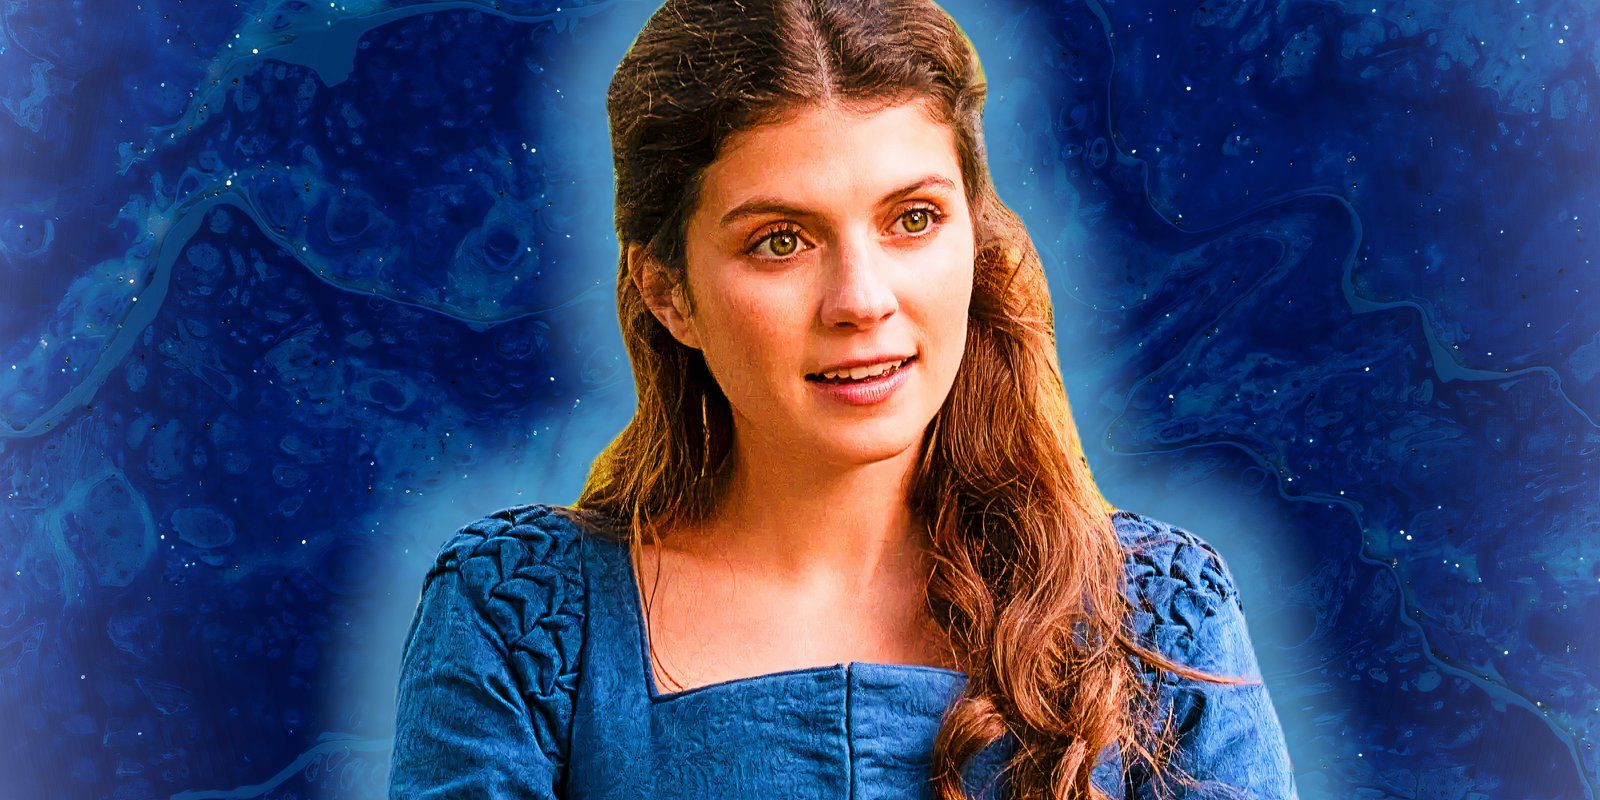 Jane from My Lady Jane is in front of a starry blue background.